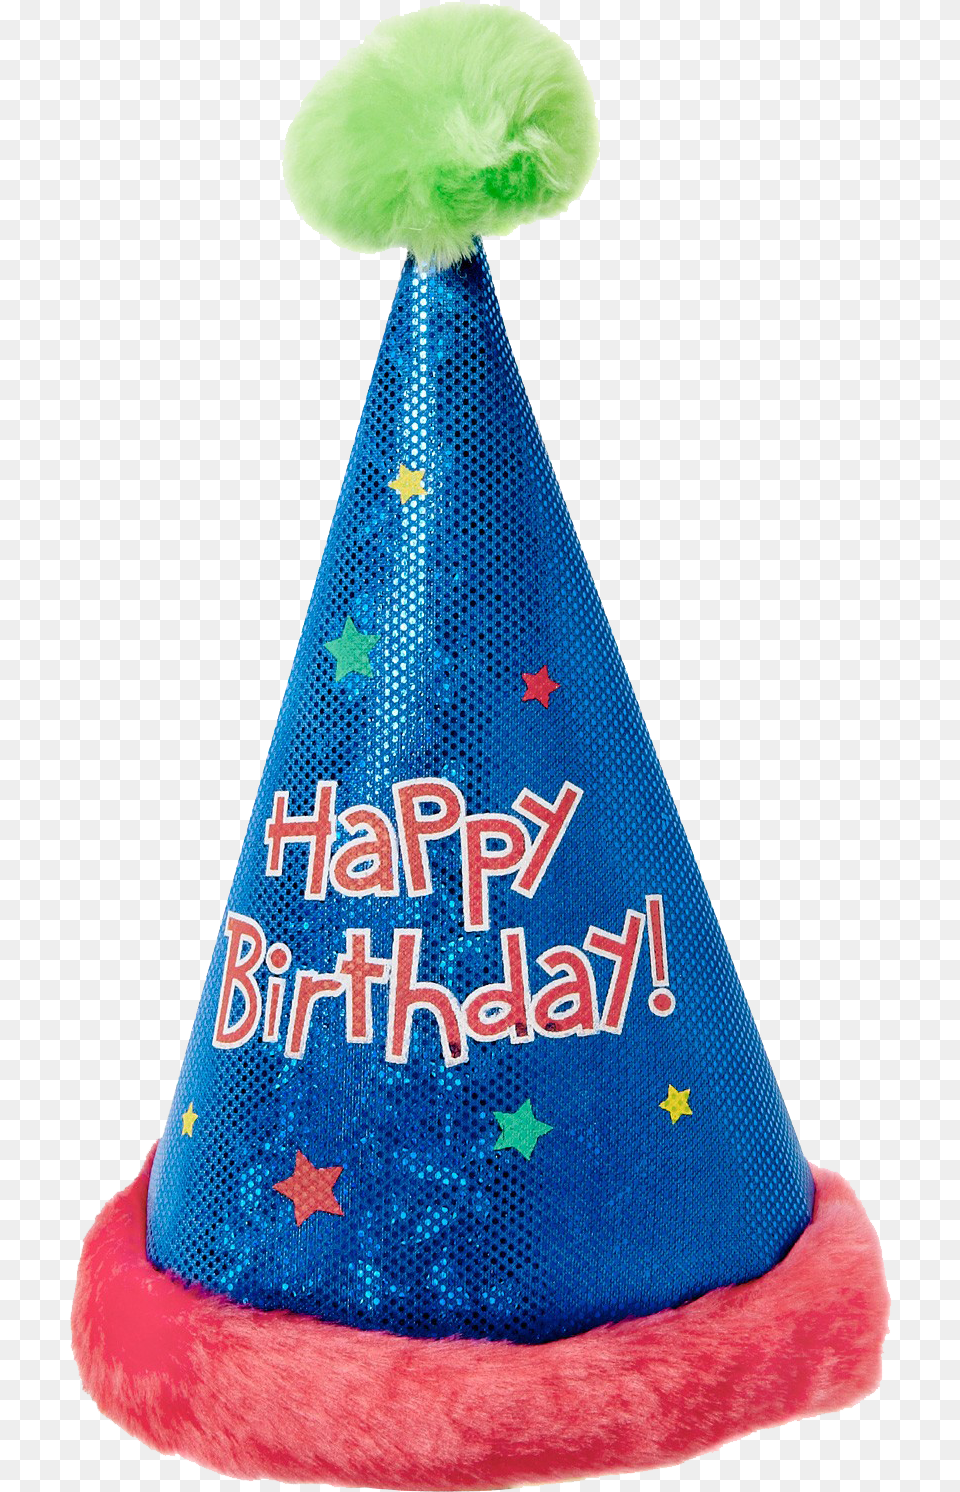 Birthday Hat Background Birthday Cap Hd, Clothing, Party Hat Free Png Download